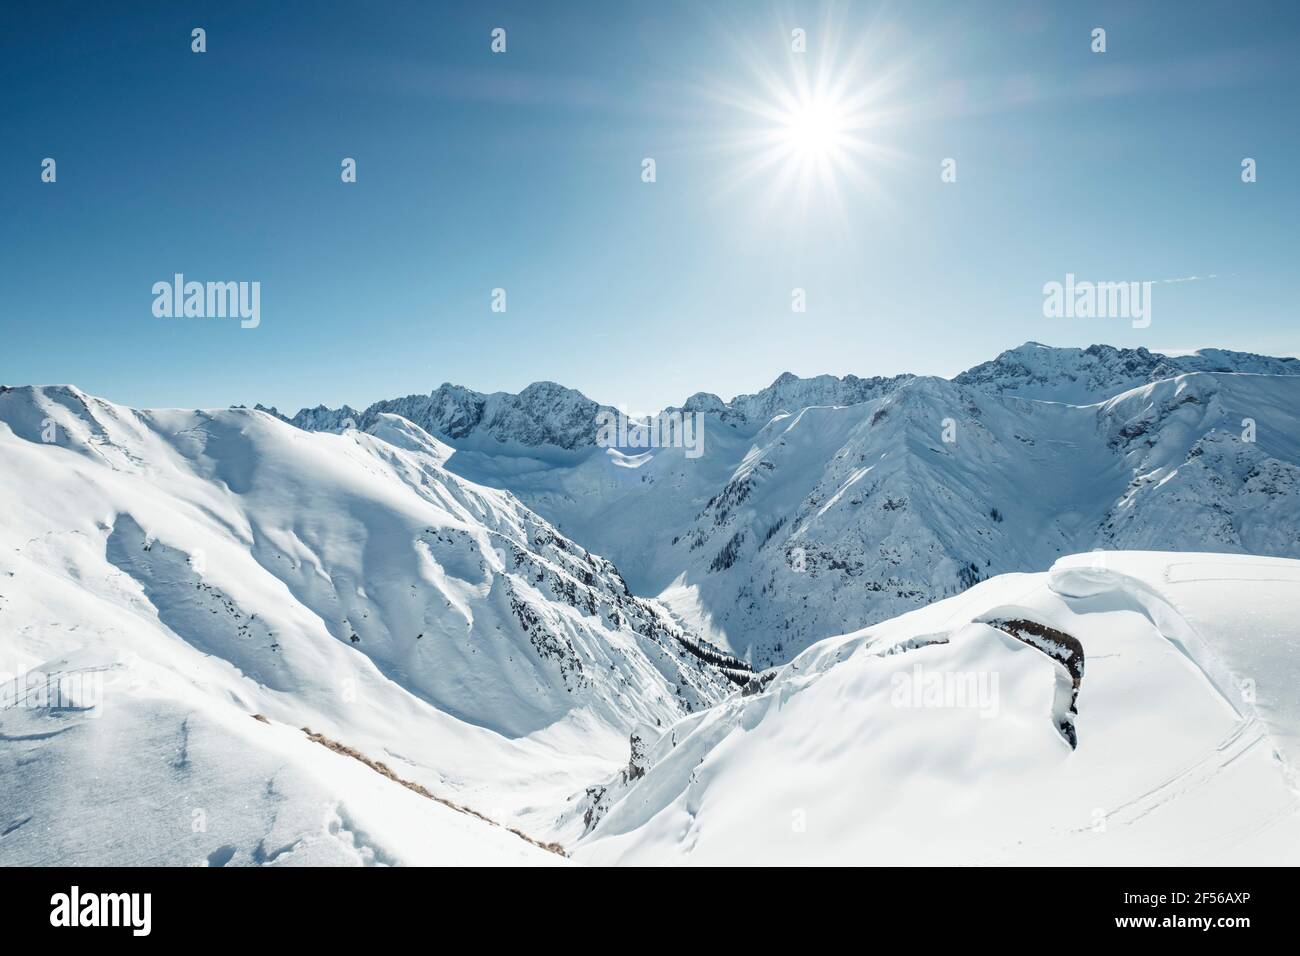 Namloser Wetterspitze and Kreuzjoch covered in snow against sky, Lechtal Alps, Tyrol, Austria Stock Photo